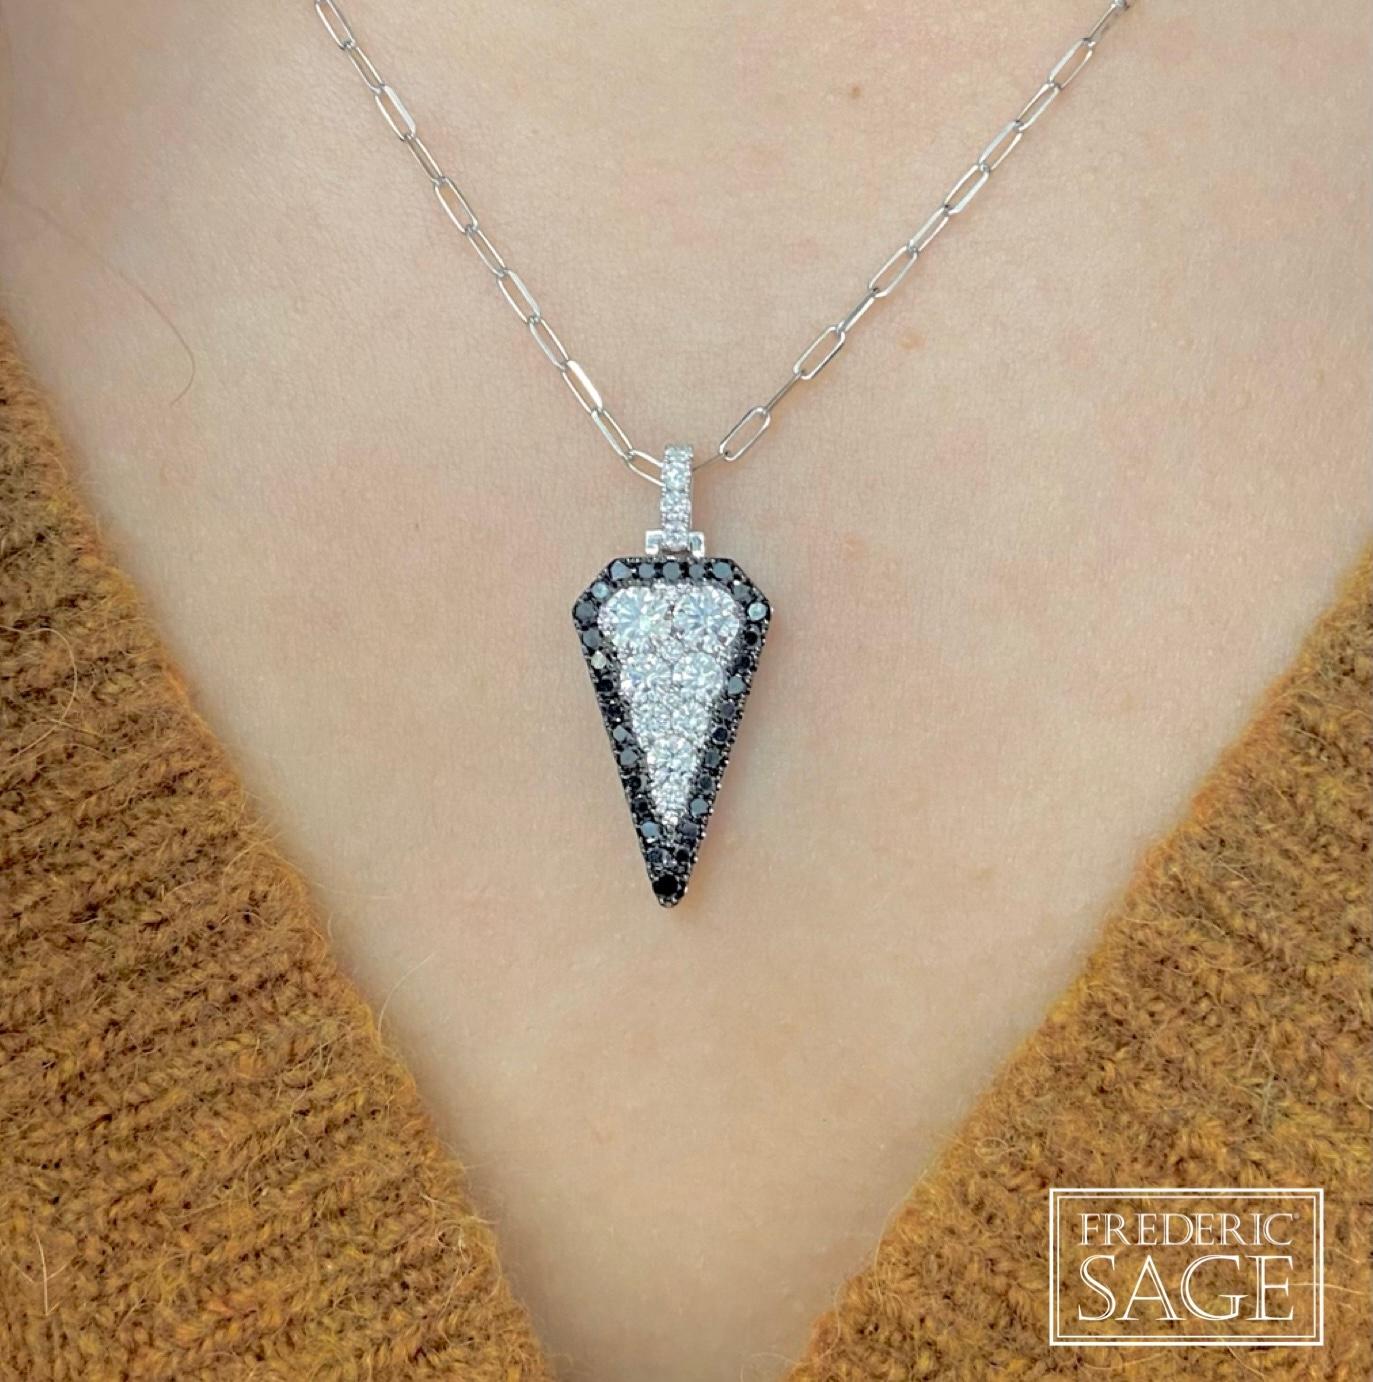 Large Arrow Black & White Diamond Pendant With Diamond Bale And Chain, Black Diamond 0.42 Ct, White Diamond 0.95 Ct, (approx 20 mm – 21 mm including bale)

Available in other metal/ gemstone options: This Diamond pendant can be made in white, pink